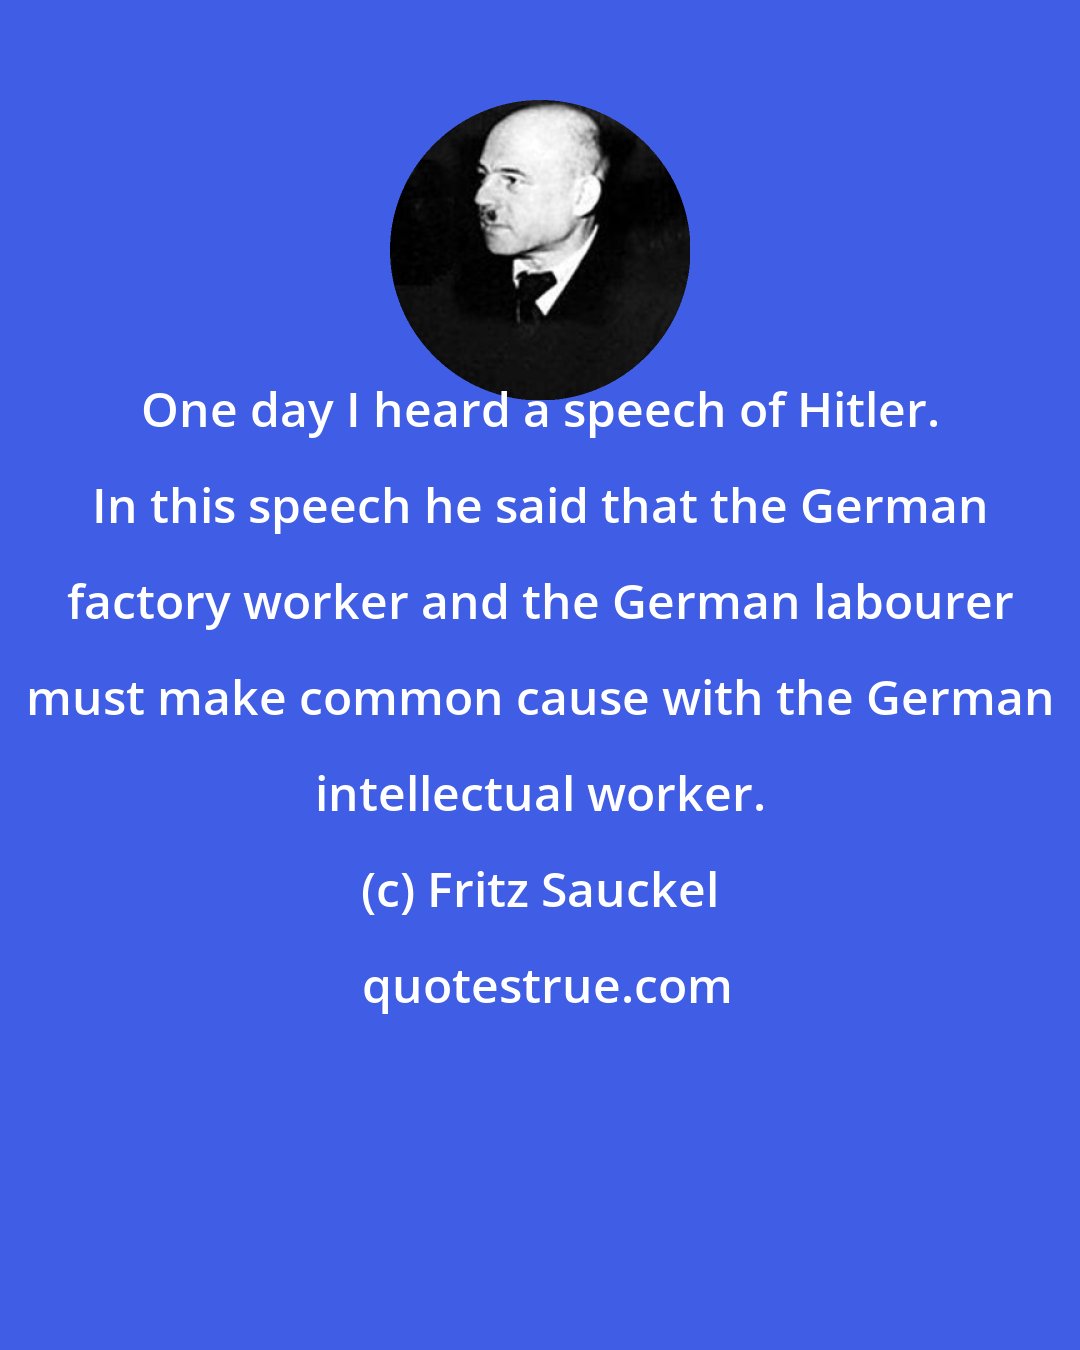 Fritz Sauckel: One day I heard a speech of Hitler. In this speech he said that the German factory worker and the German labourer must make common cause with the German intellectual worker.